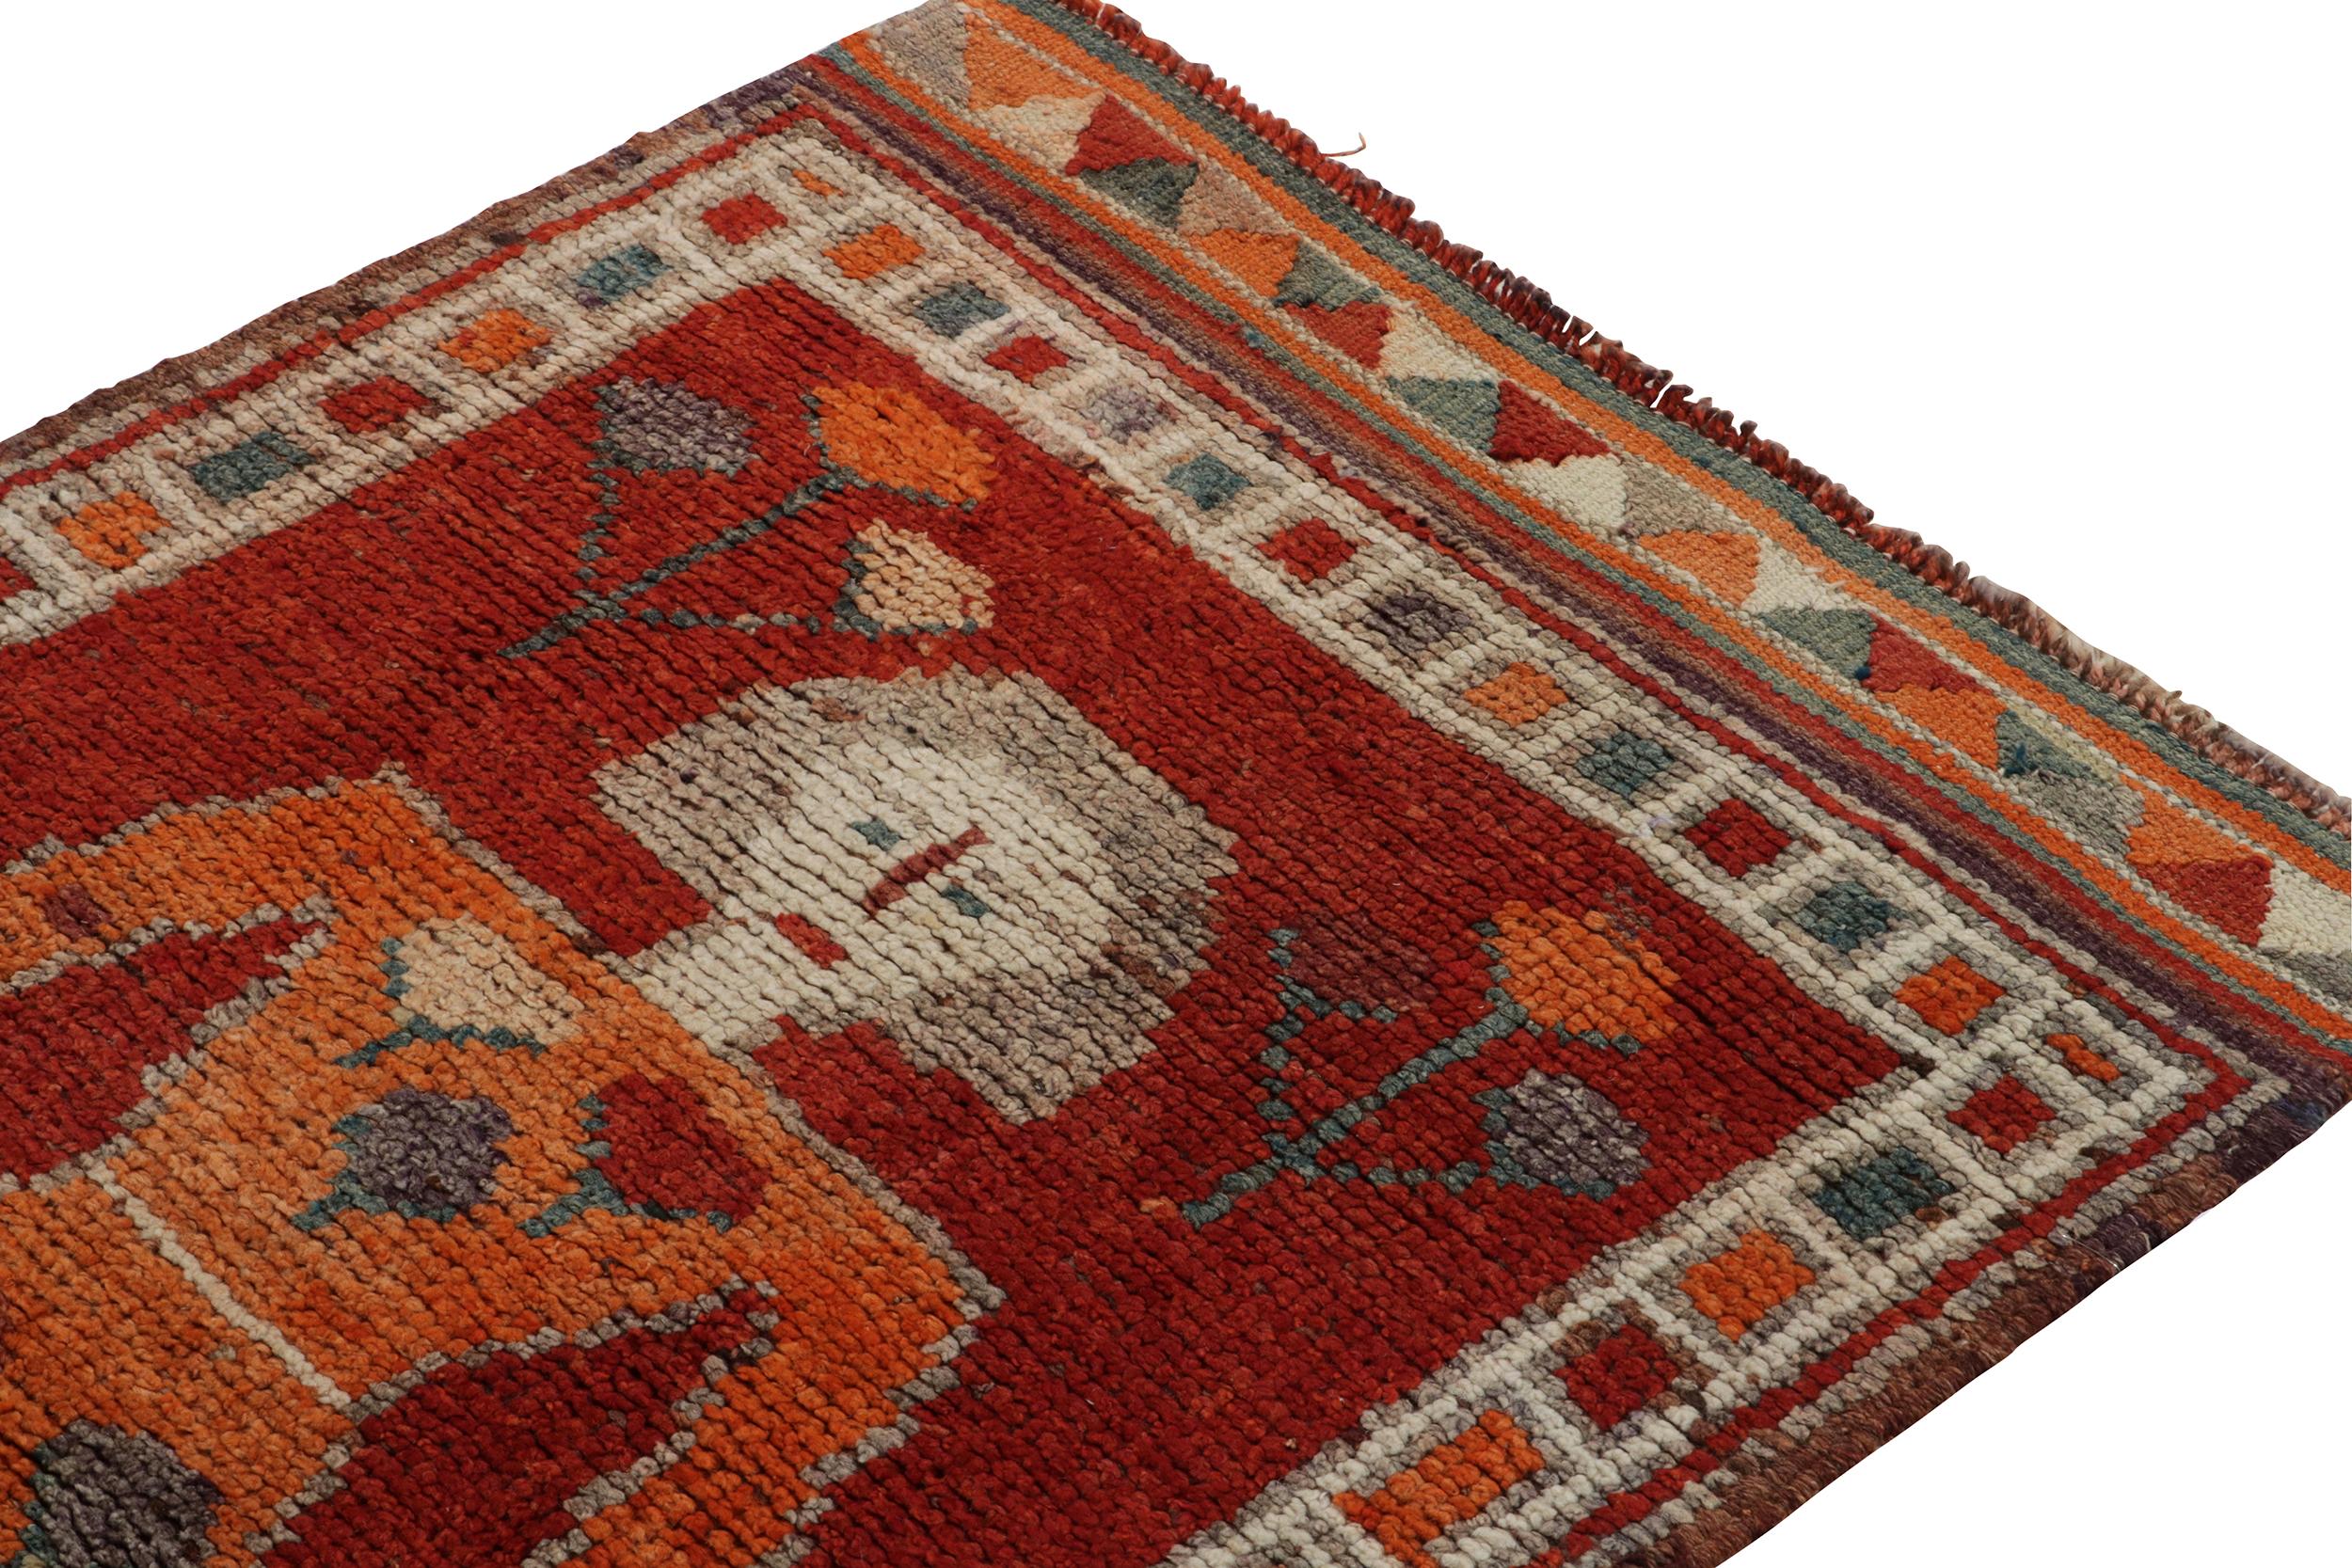 1950s Vintage Tribal Runner in Red, Orange Pictorial Figures by Rug & Kilim In Good Condition For Sale In Long Island City, NY